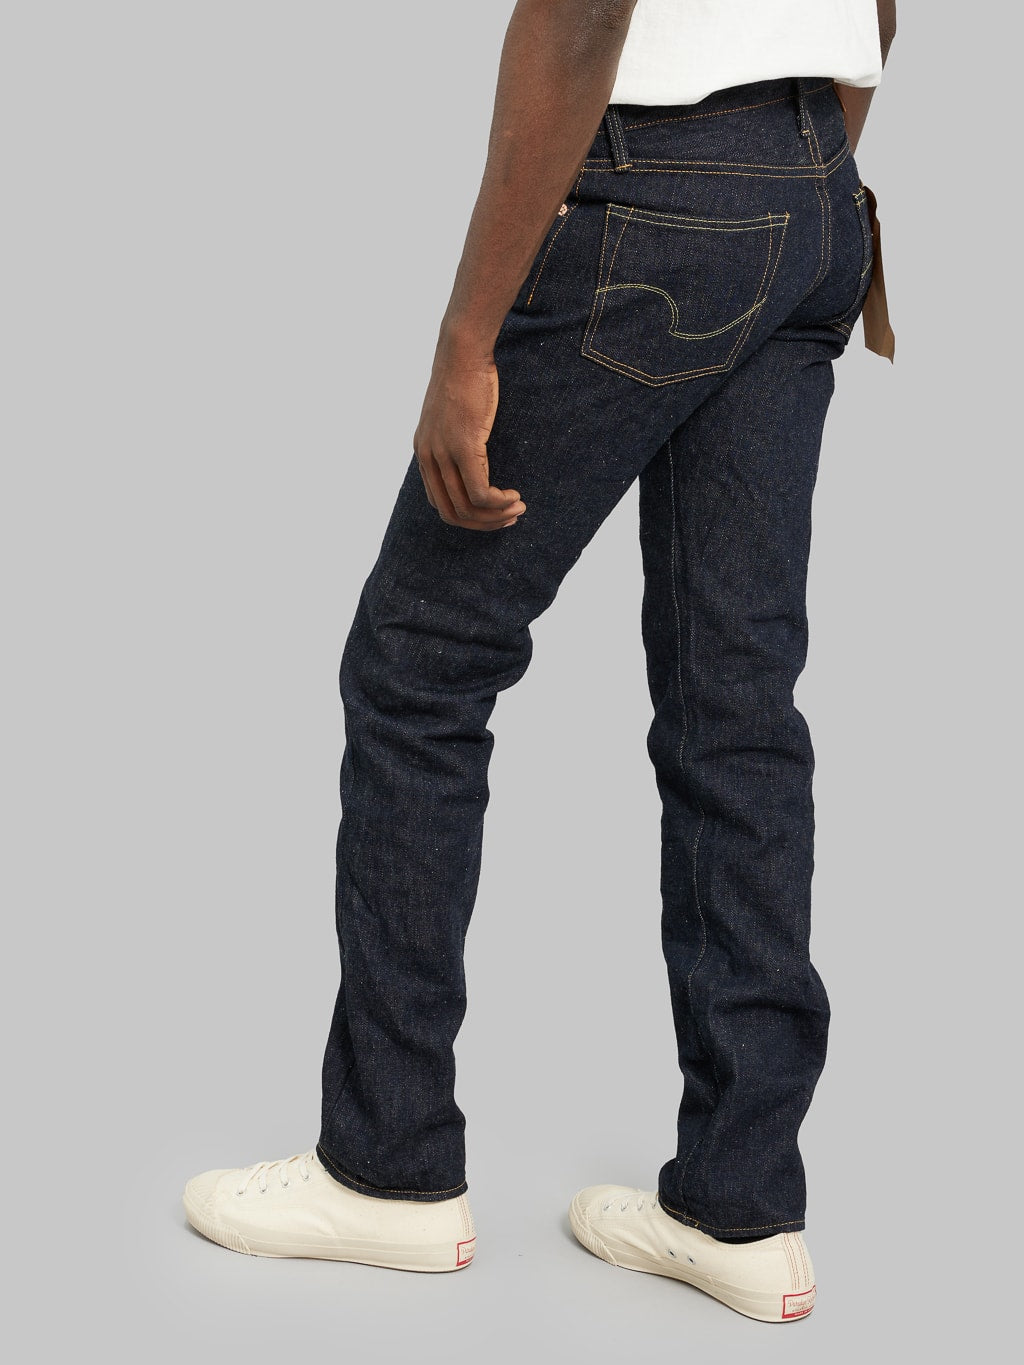 ONI 525 Natural Indigo Rope Dyeing Denim Classic Straight Jeans mid rise